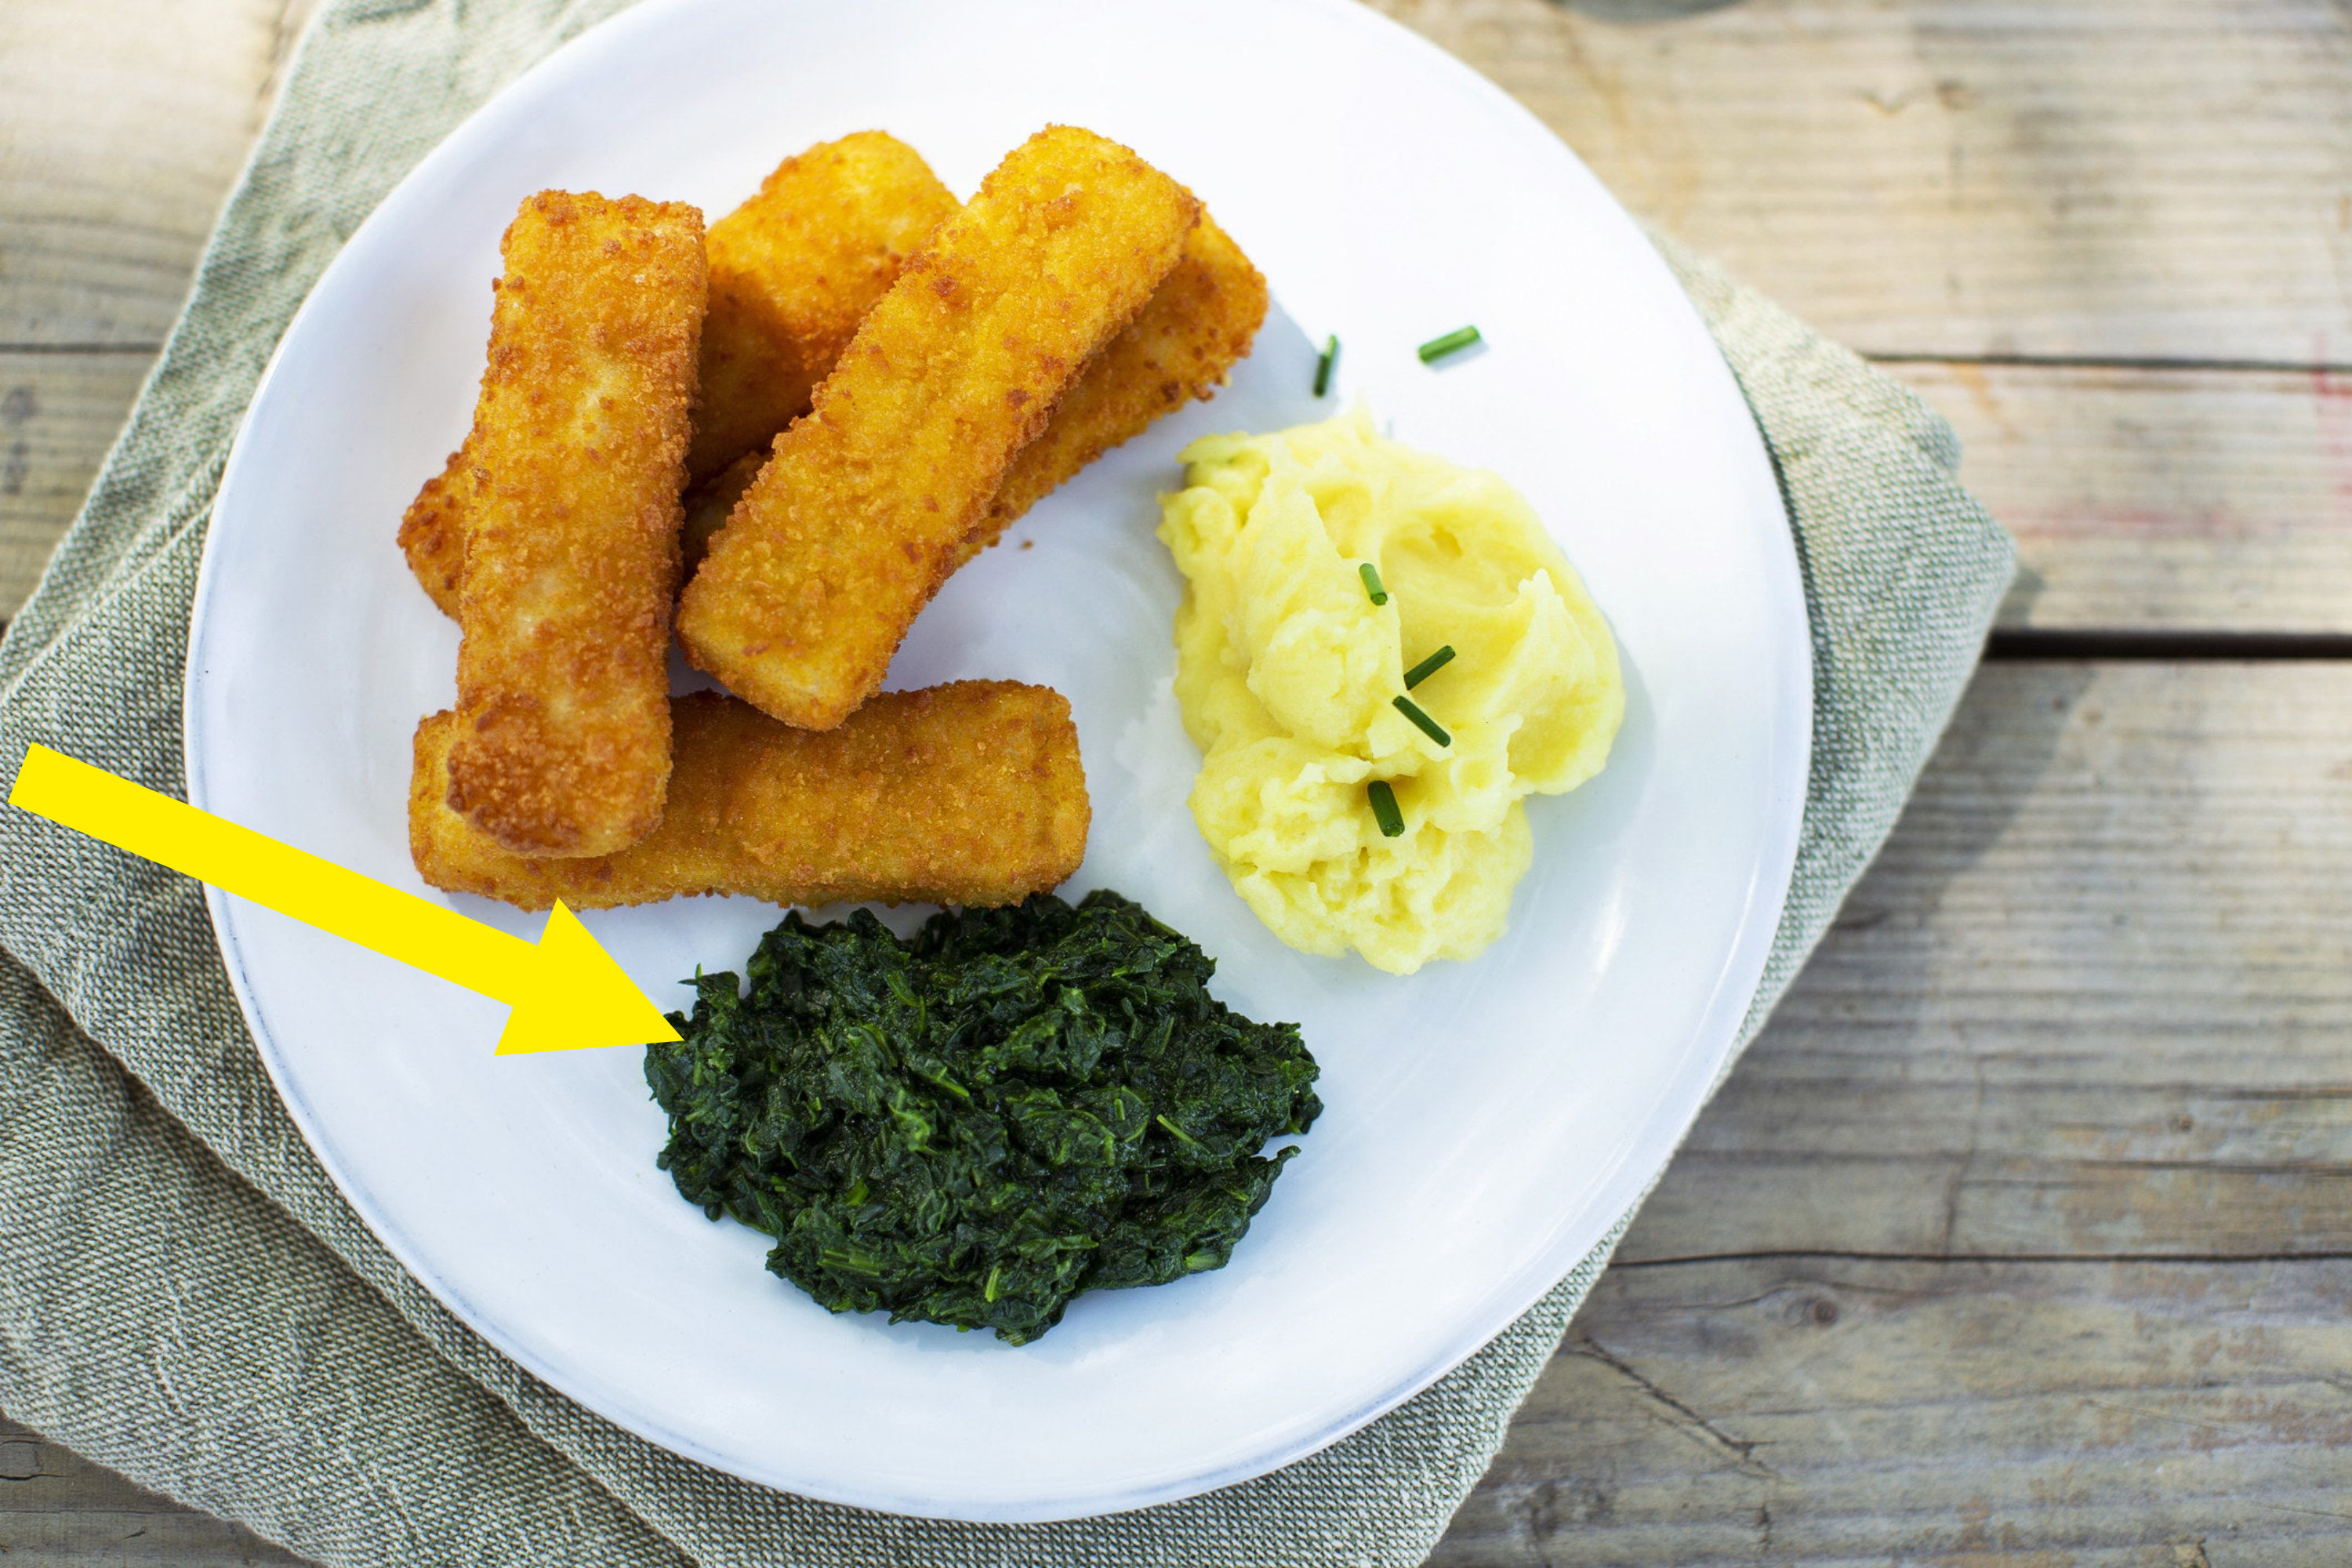 Fish sticks with mashed potatoes and spinach.